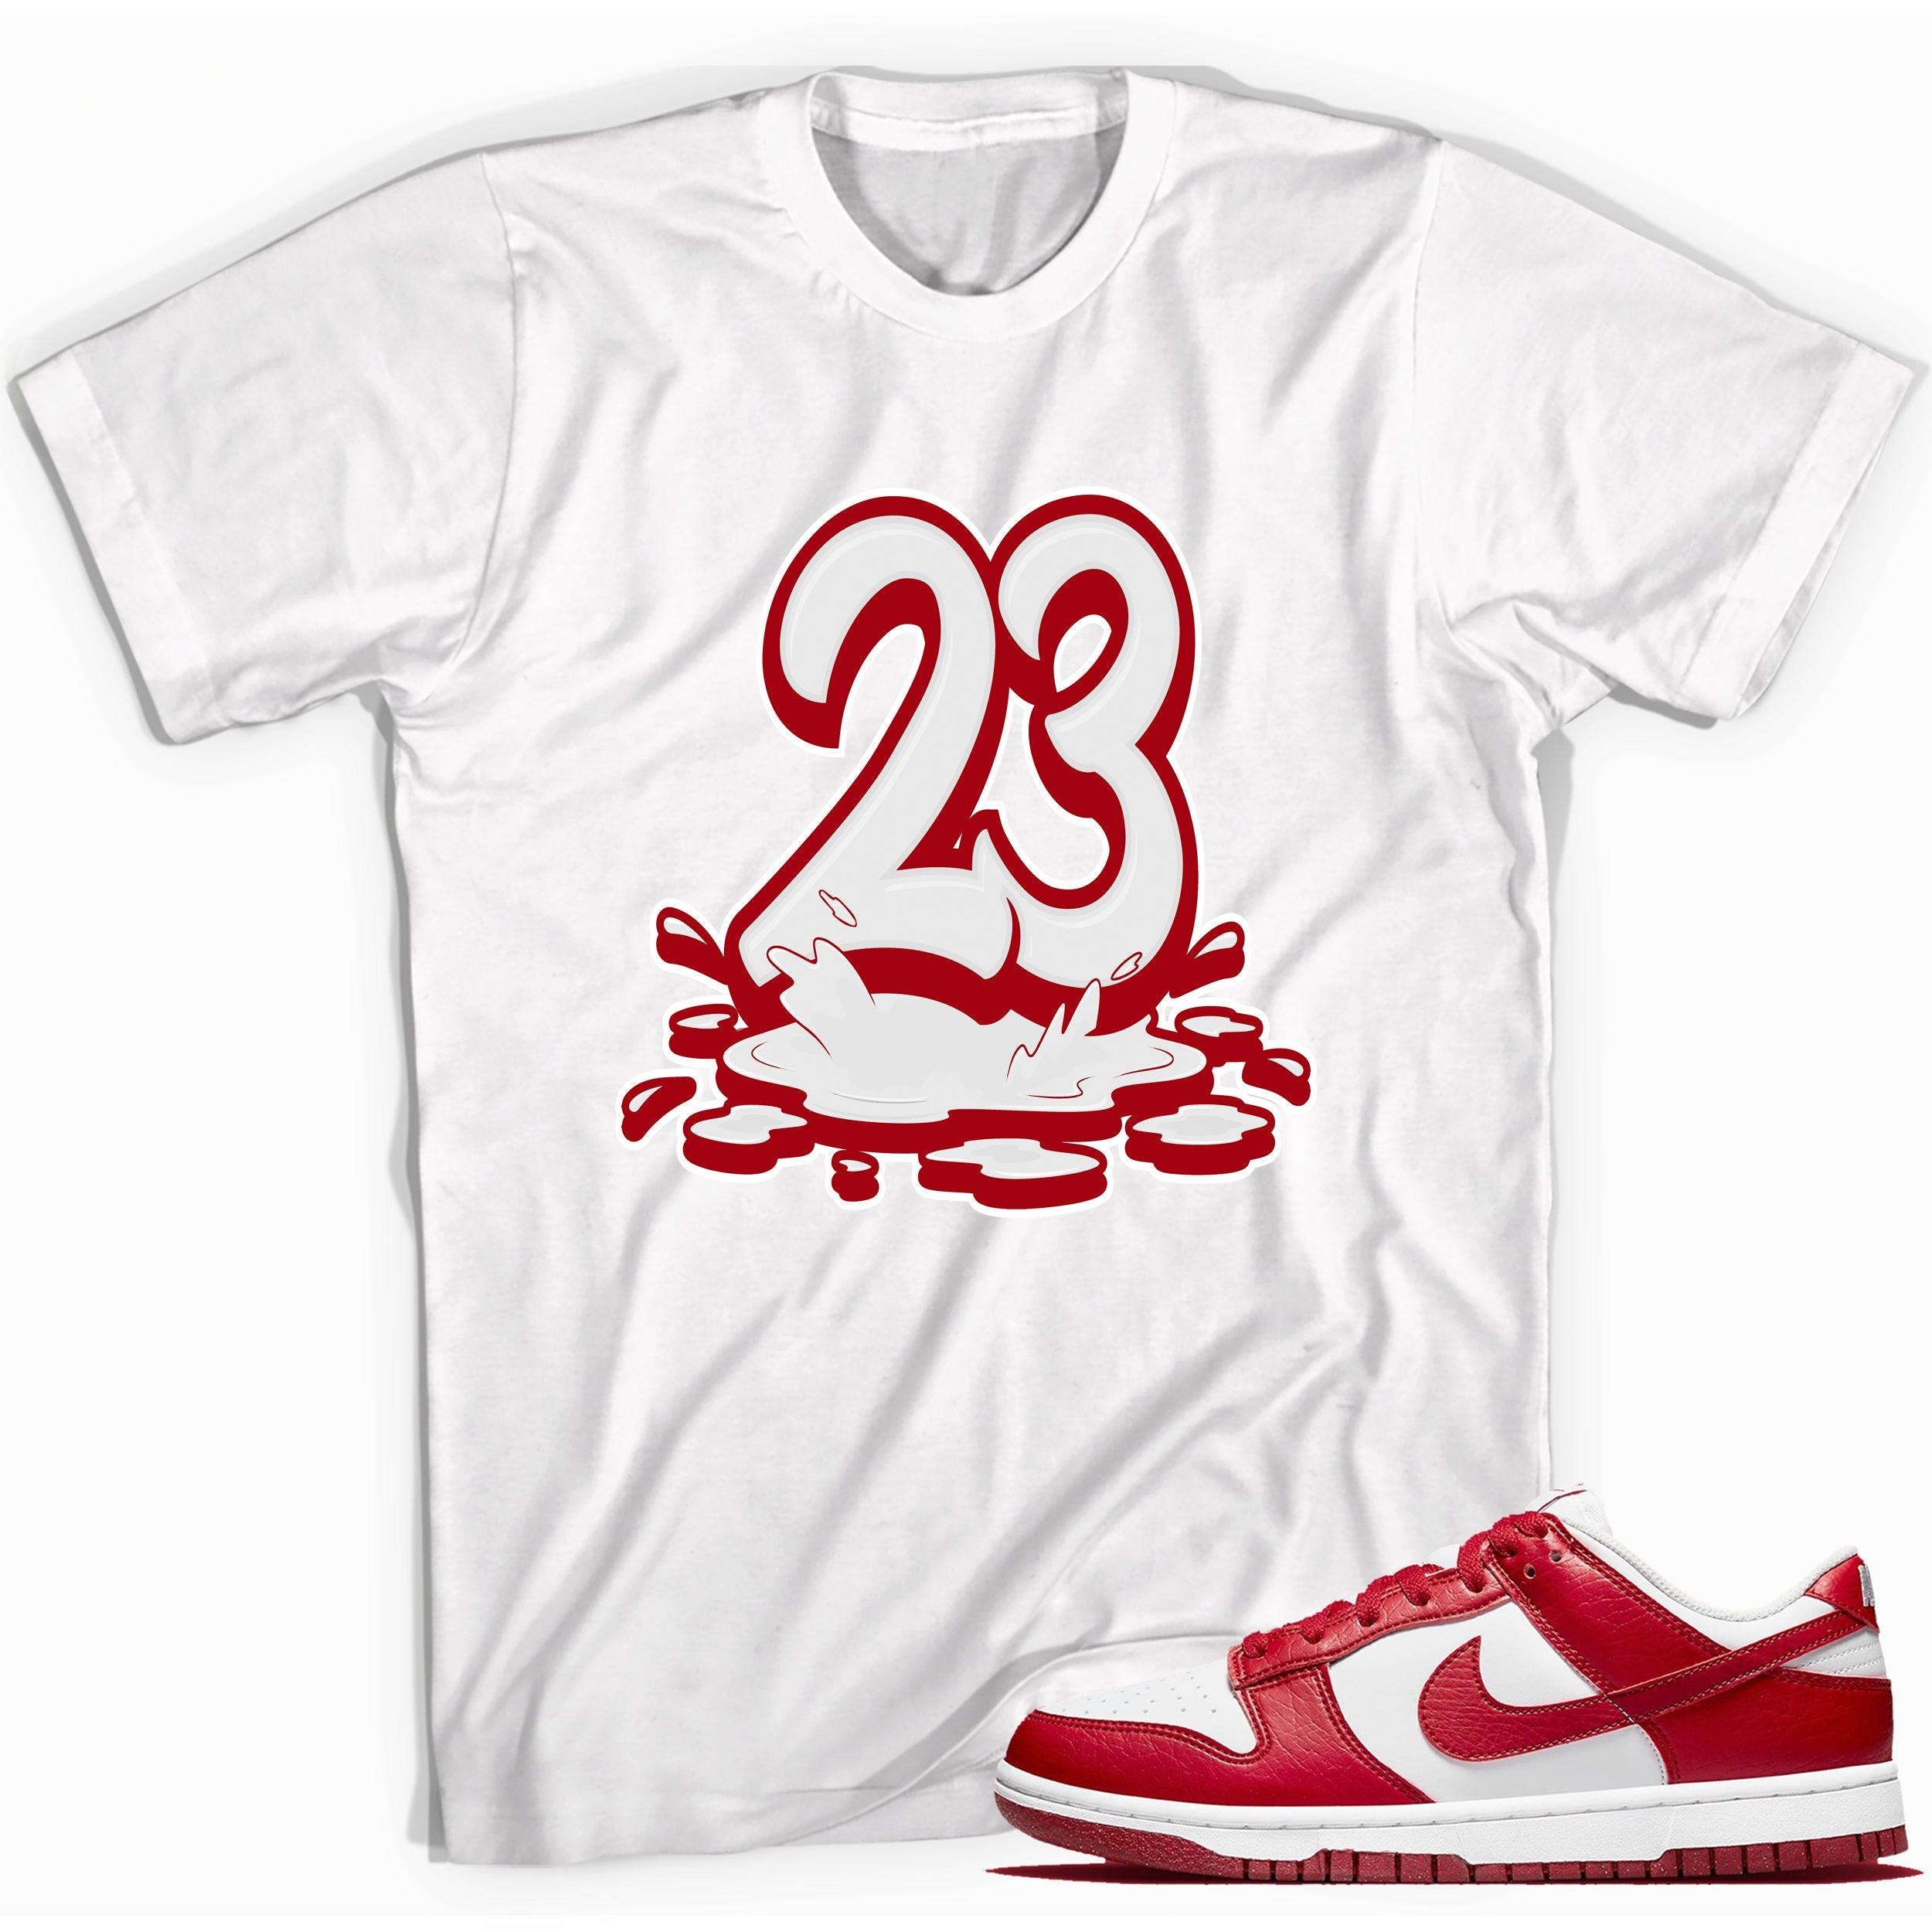 23 Melting Shirt Dunk Low Next Nature White Gym Red Sneakers photo